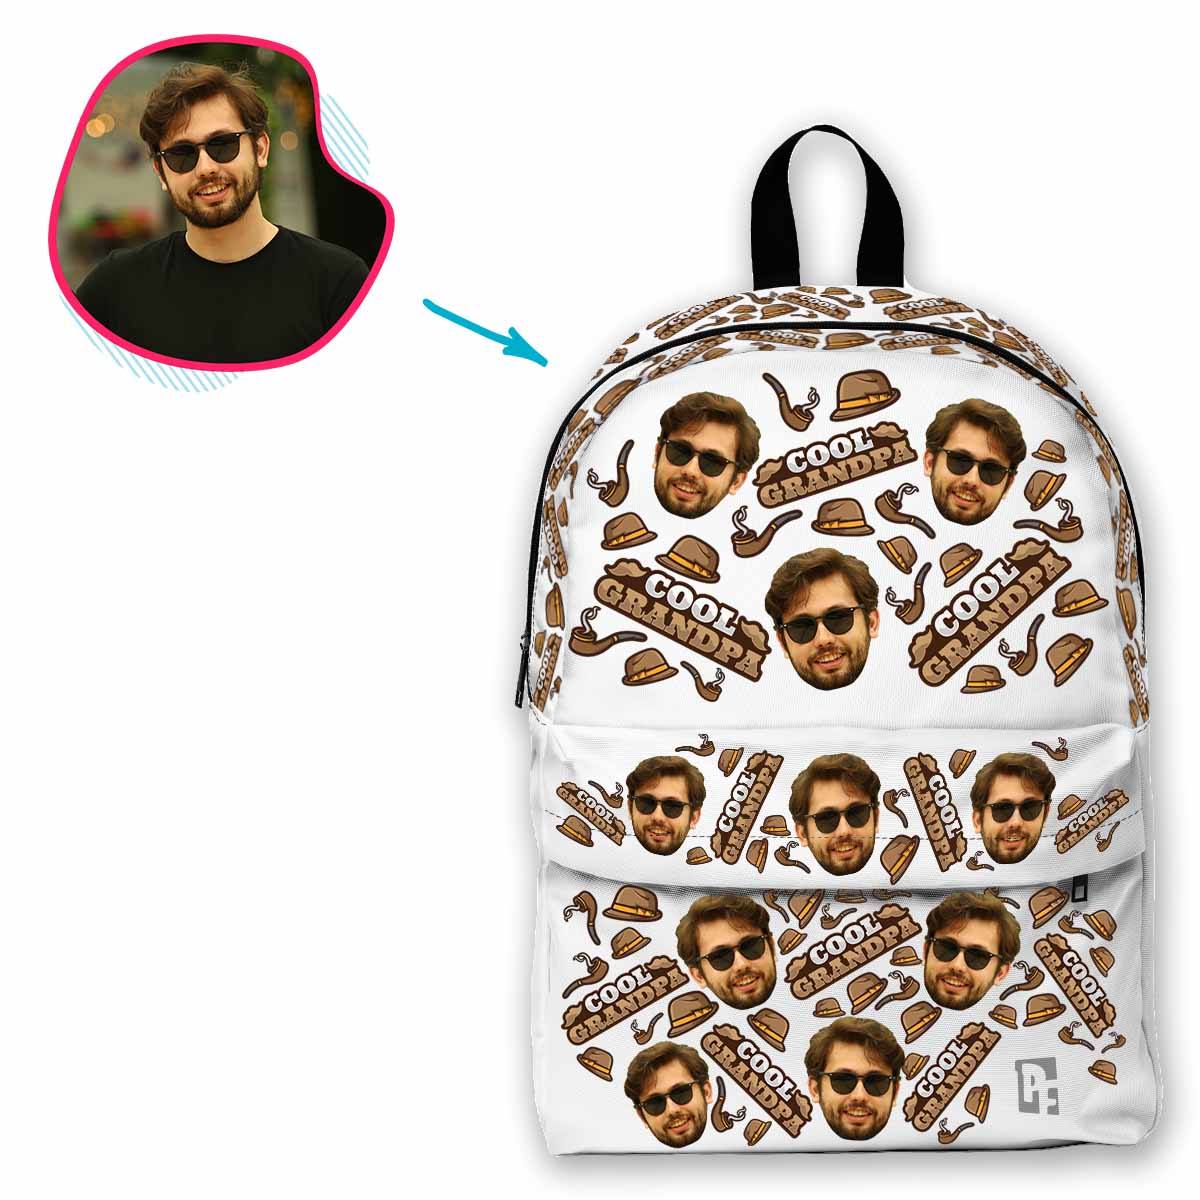 white Cool Grandfather classic backpack personalized with photo of face printed on it